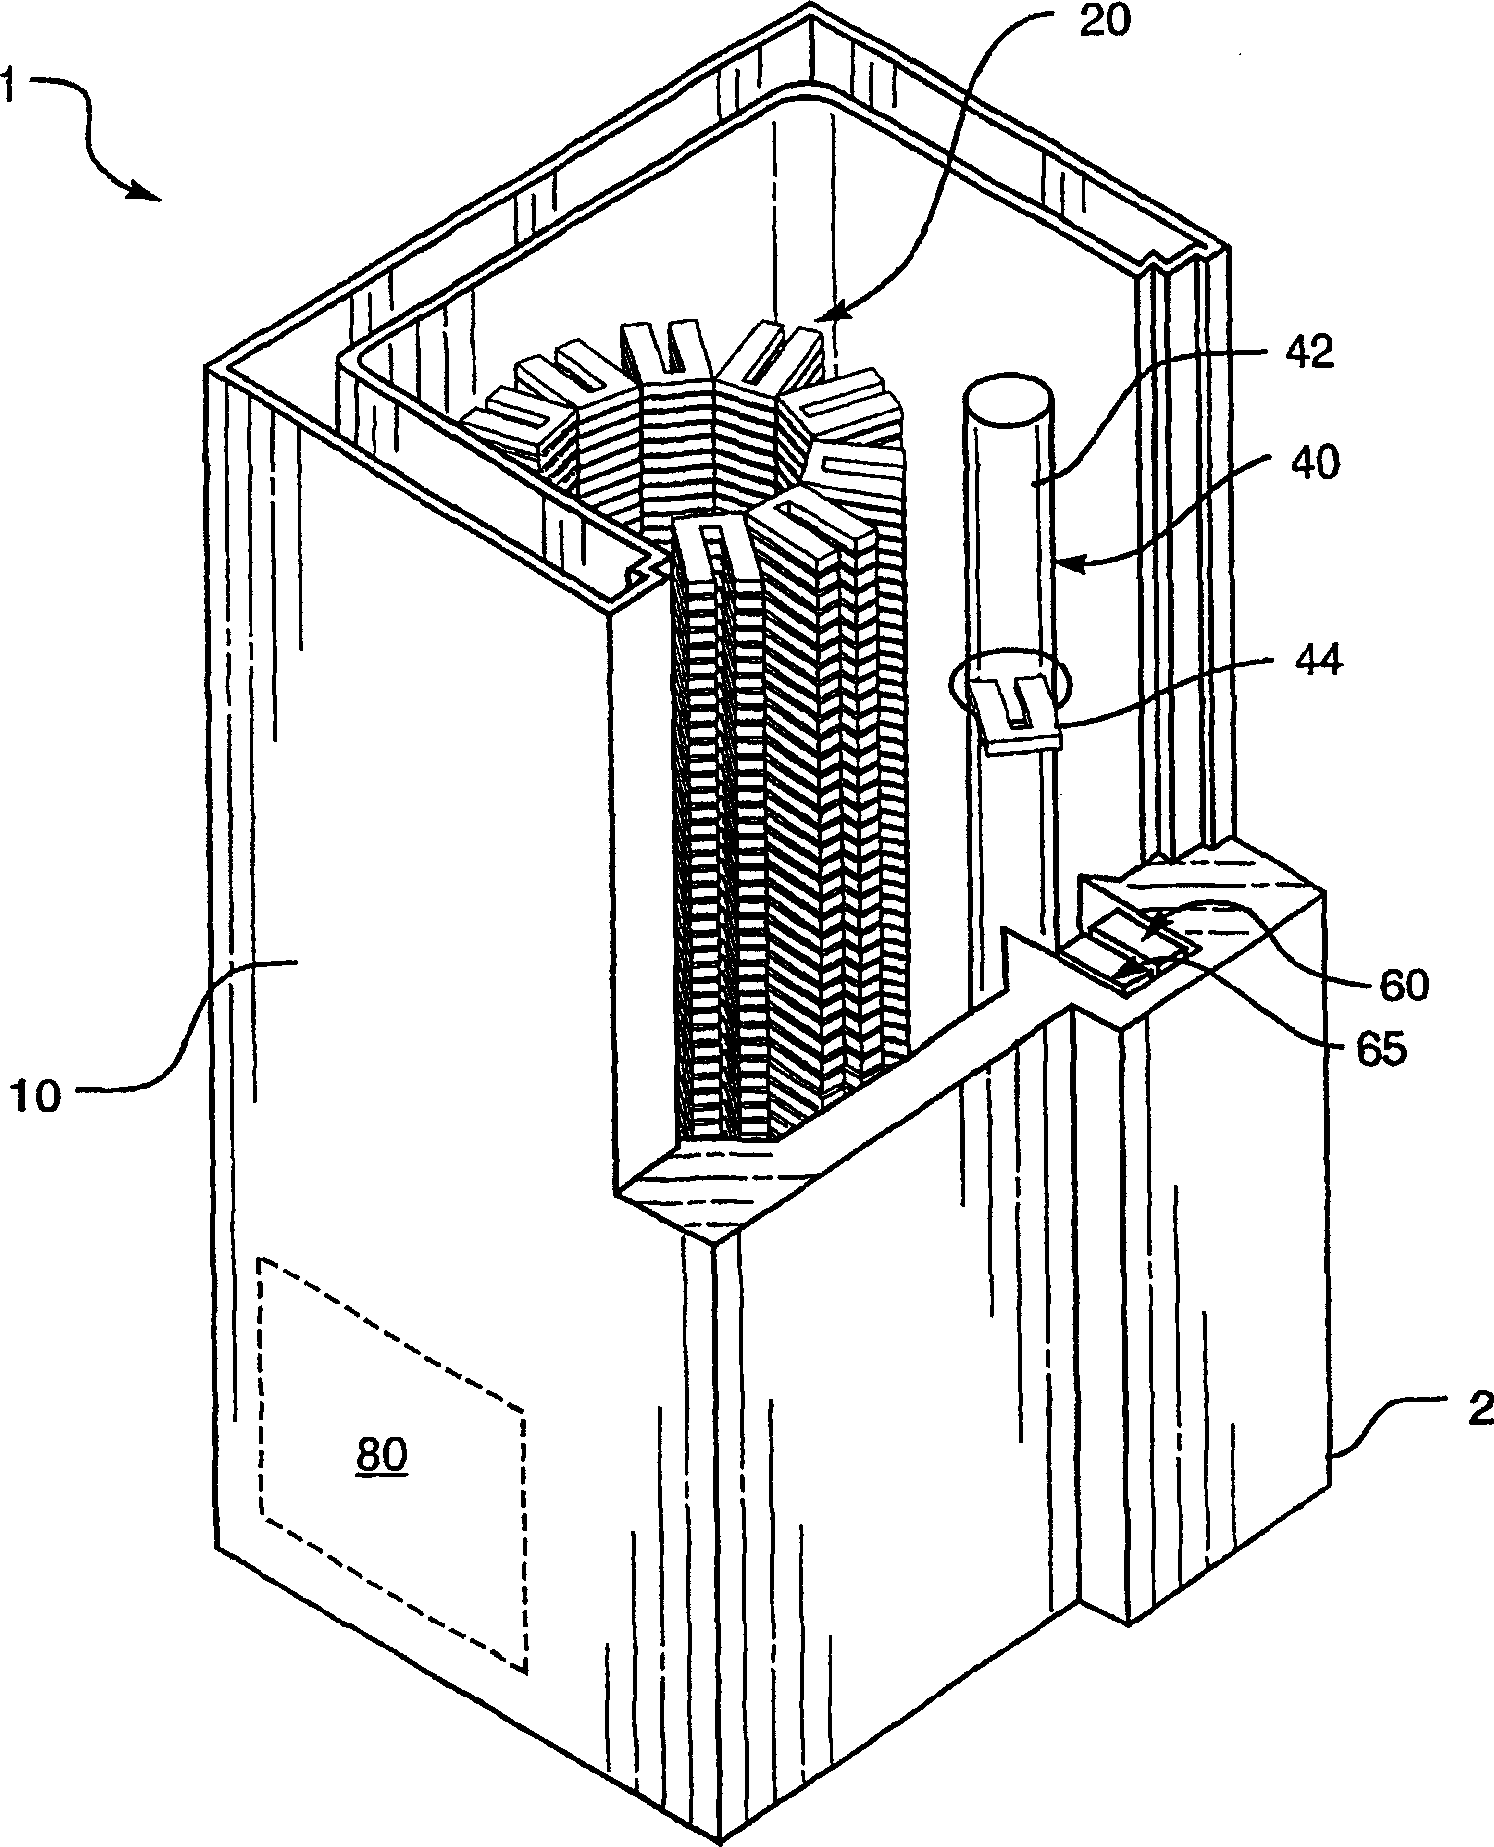 Automated storage and retrieval apparatus for freezers and related method thereof